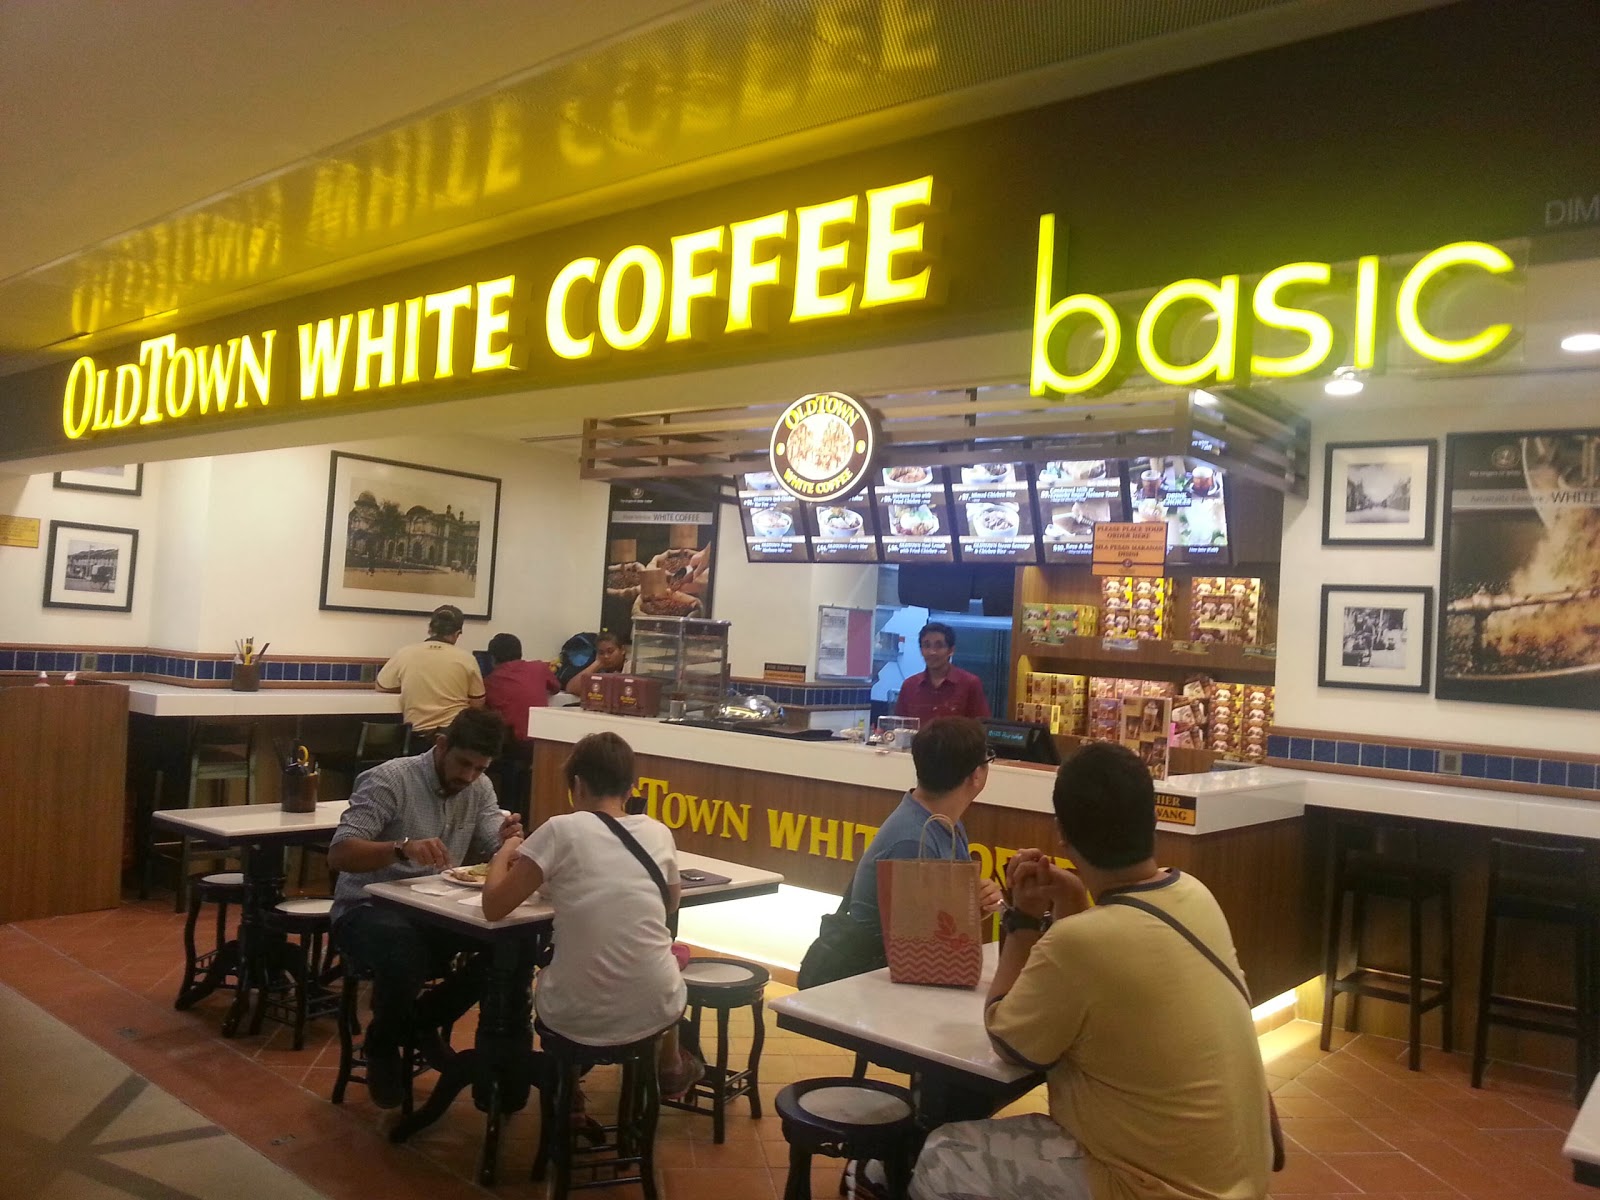 Wanderlust Palate Old Town White Coffee Basic at Avenue K